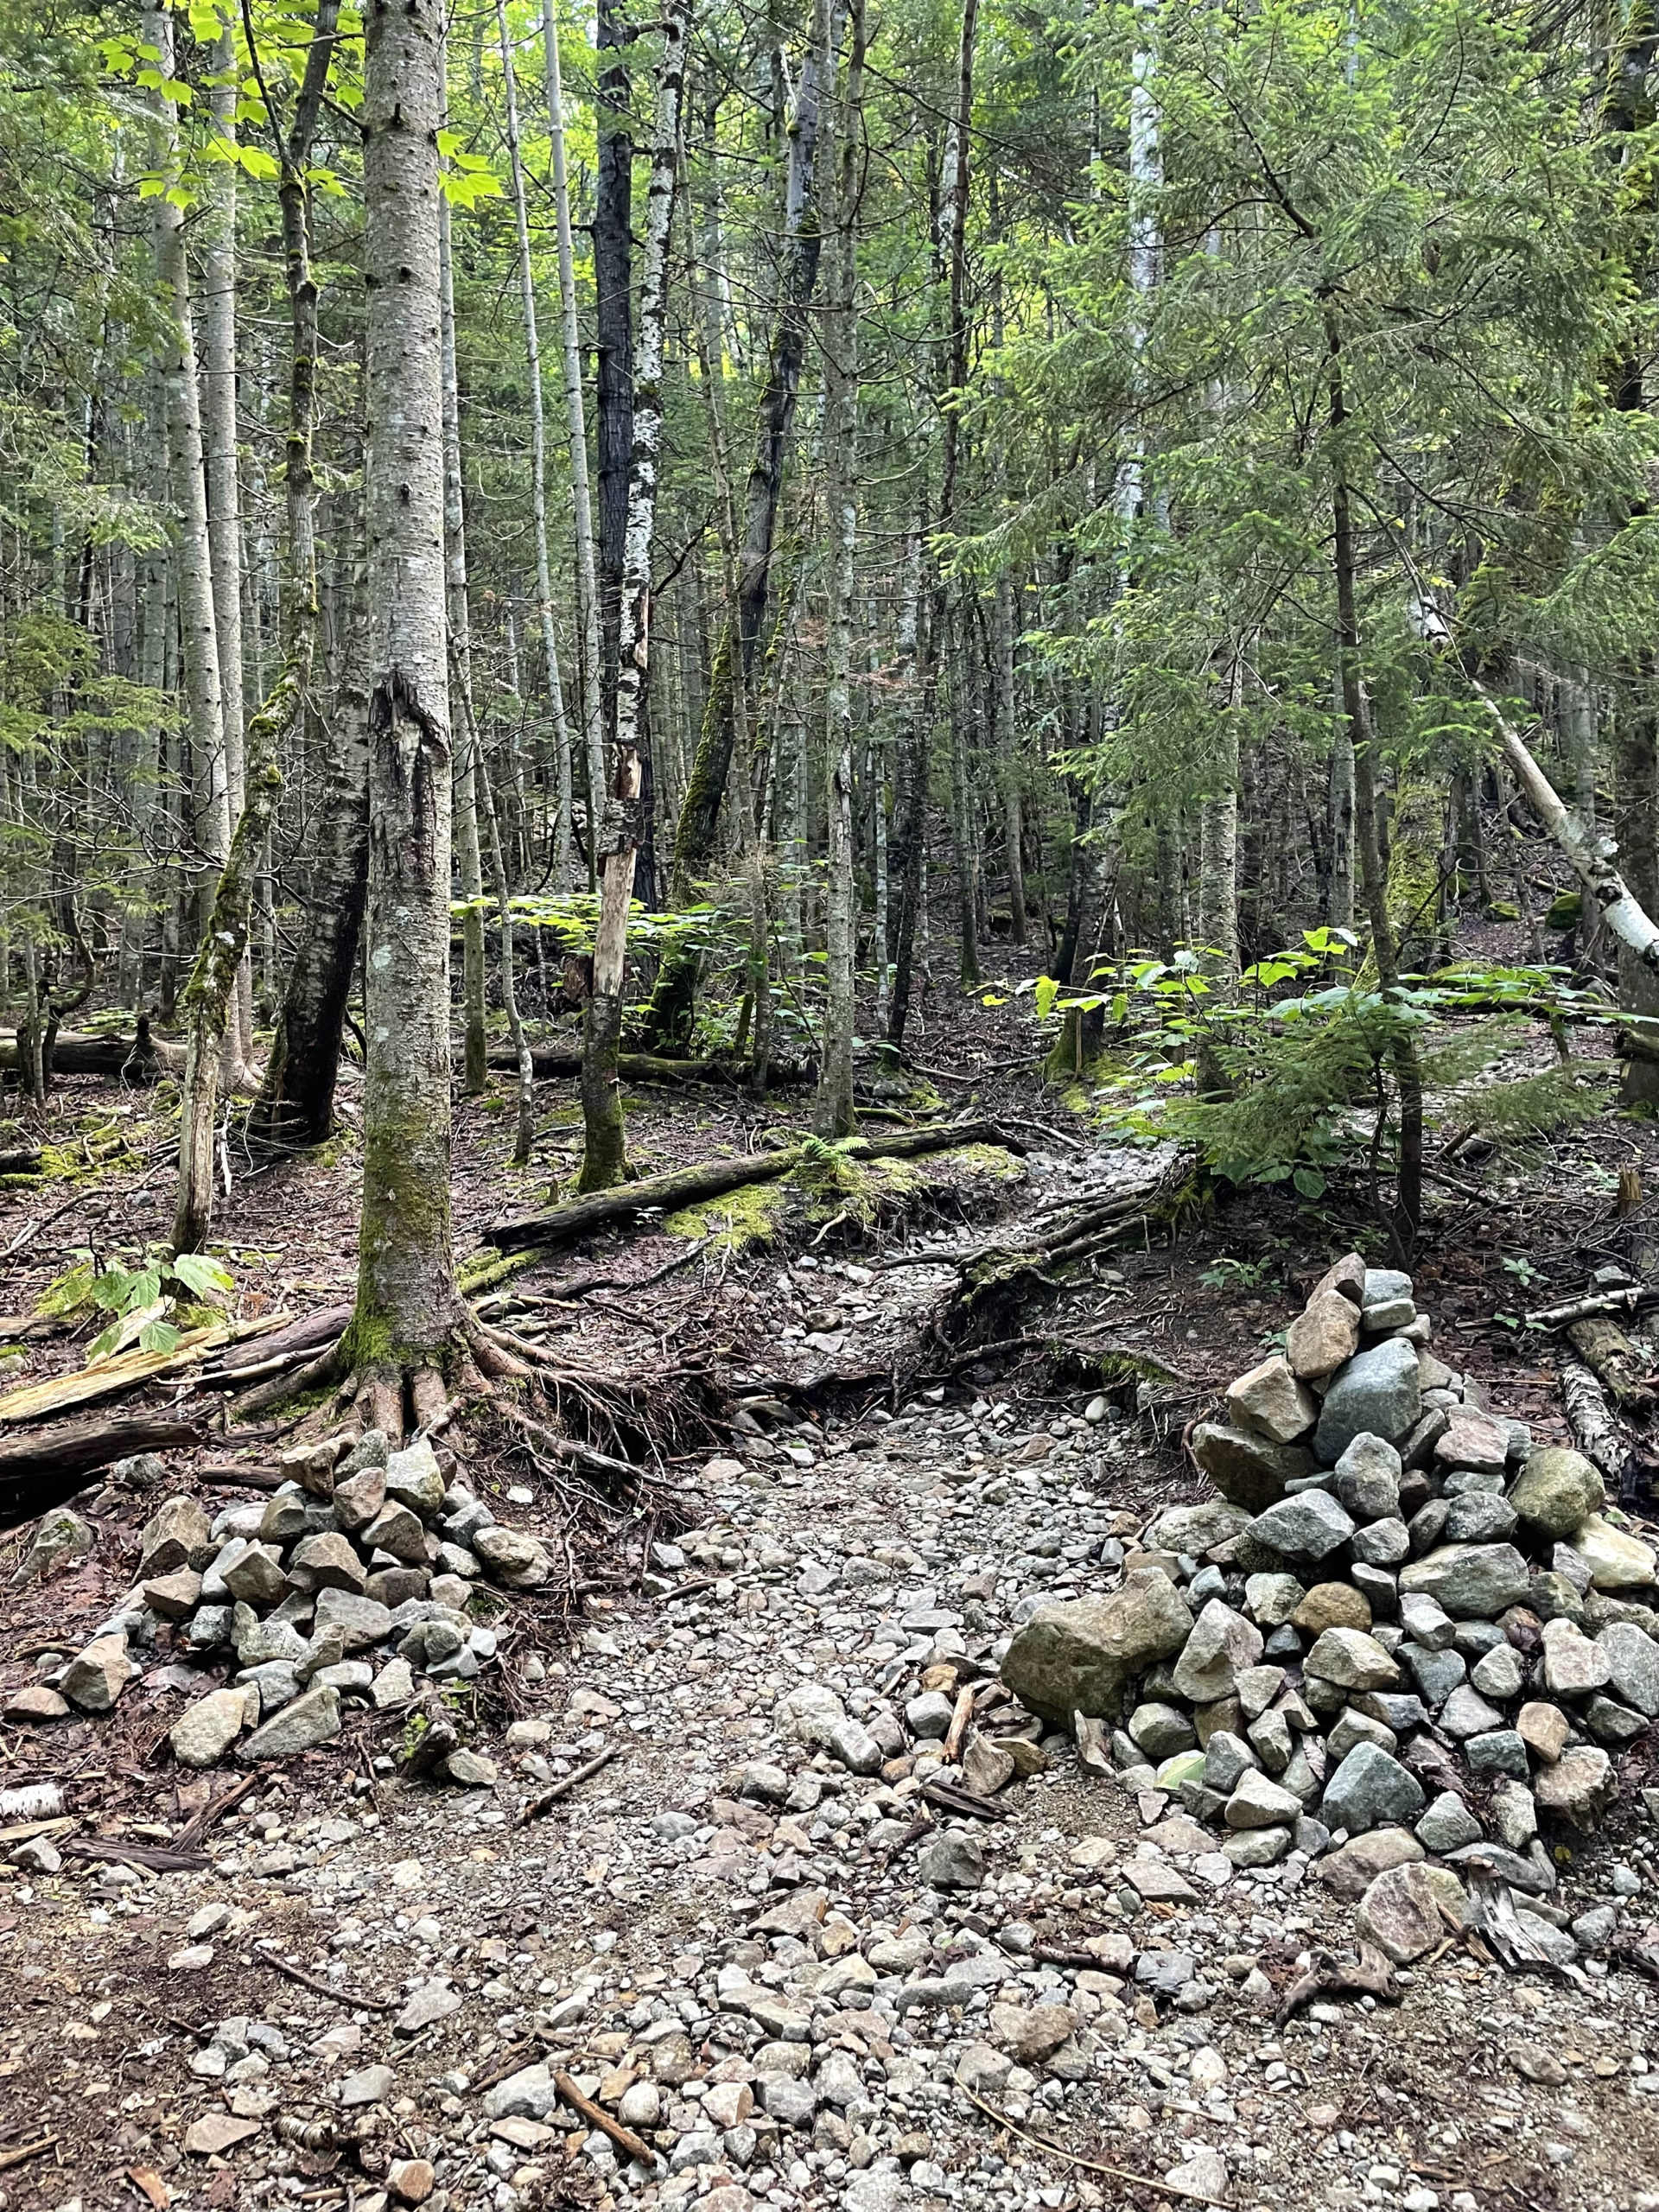 Entrance to Owl's Head Path, seen while hiking Owl's Head Mtn in the White Mountain National Forest, New Hampshire